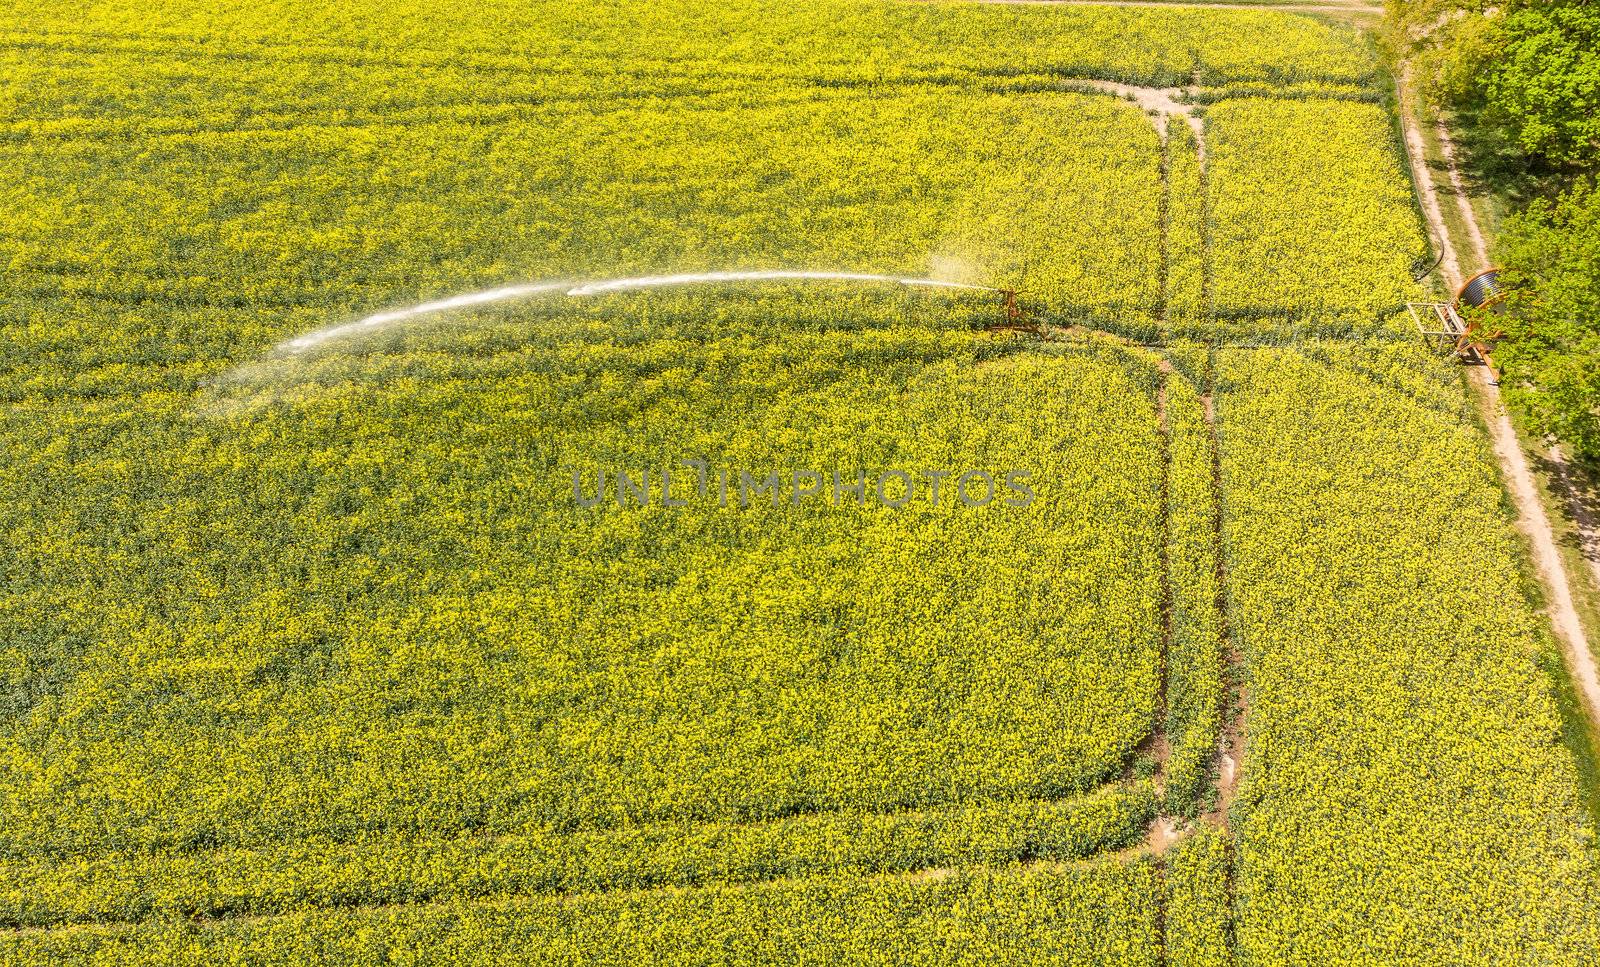 Aerial view of a yellow flowering field with rape and a sprinkler system for irrigation of the field, made with drone